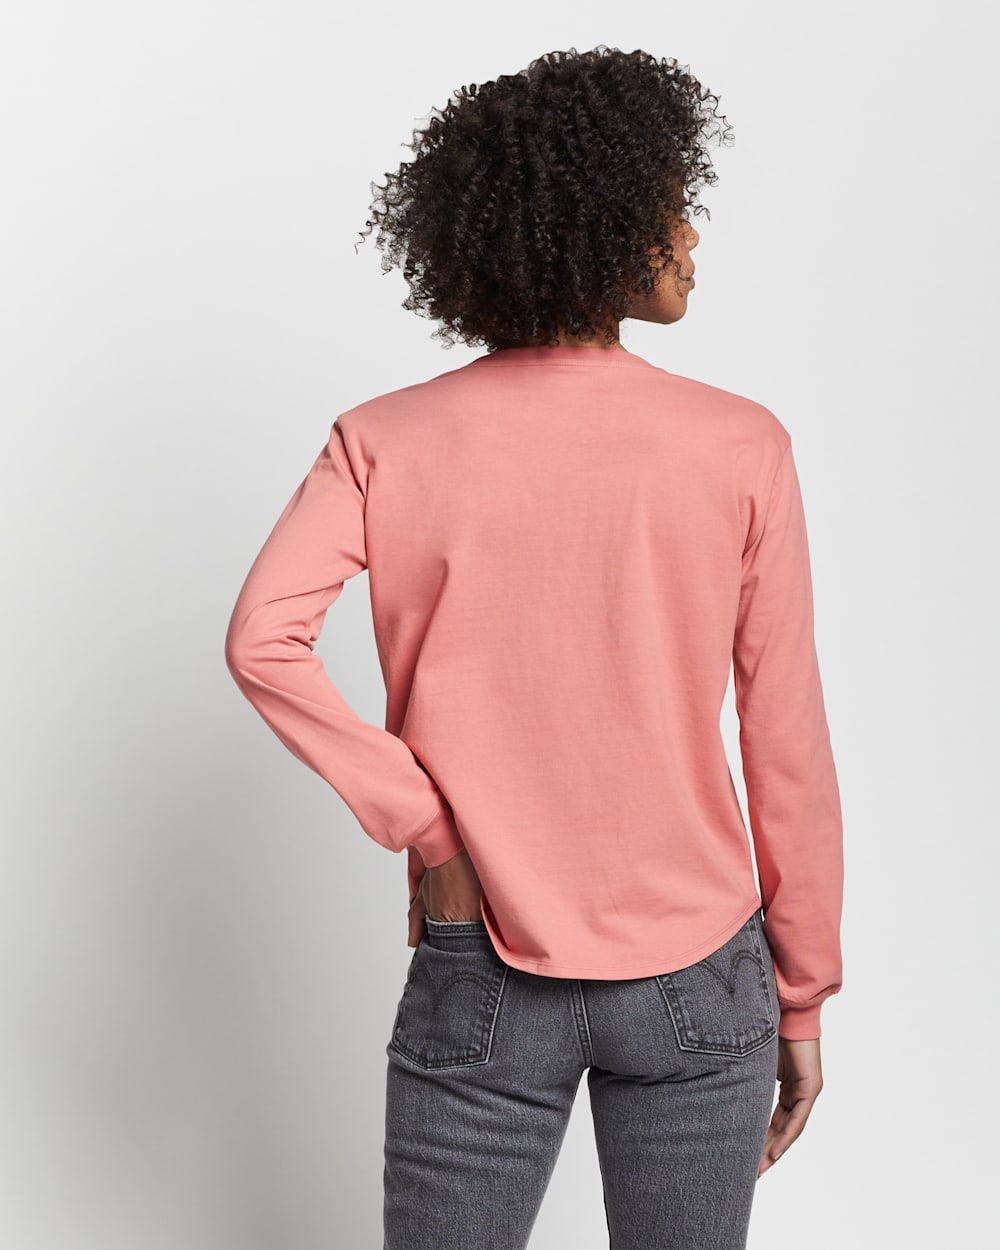 ALTERNATE VIEW OF WOMEN'S LONG-SLEEVE DESCHUTES TEE IN FADED ROSE image number 2